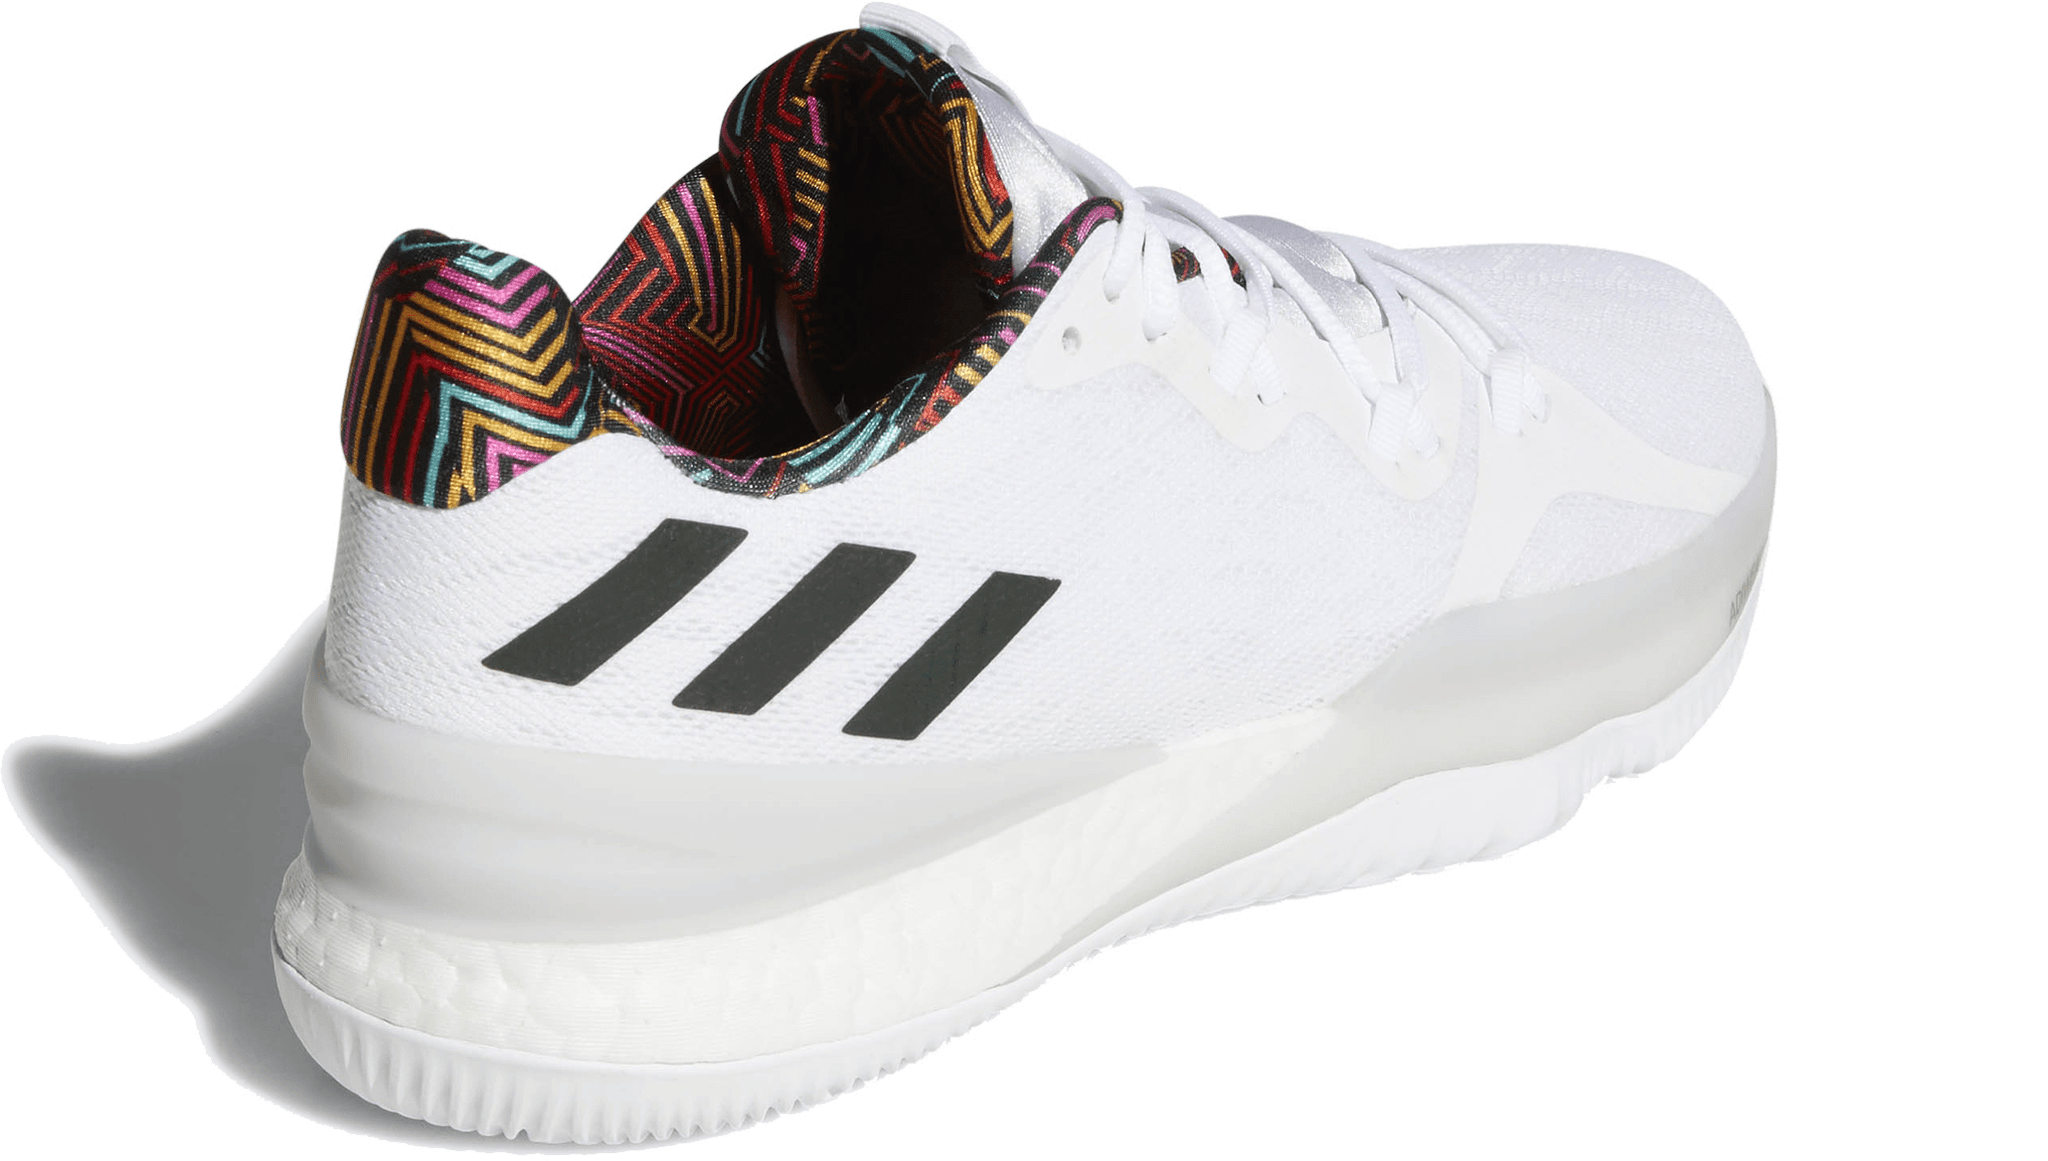 Adidas Crazylight Boost 2018 - Review, Deals, Pics of 4 Colorways